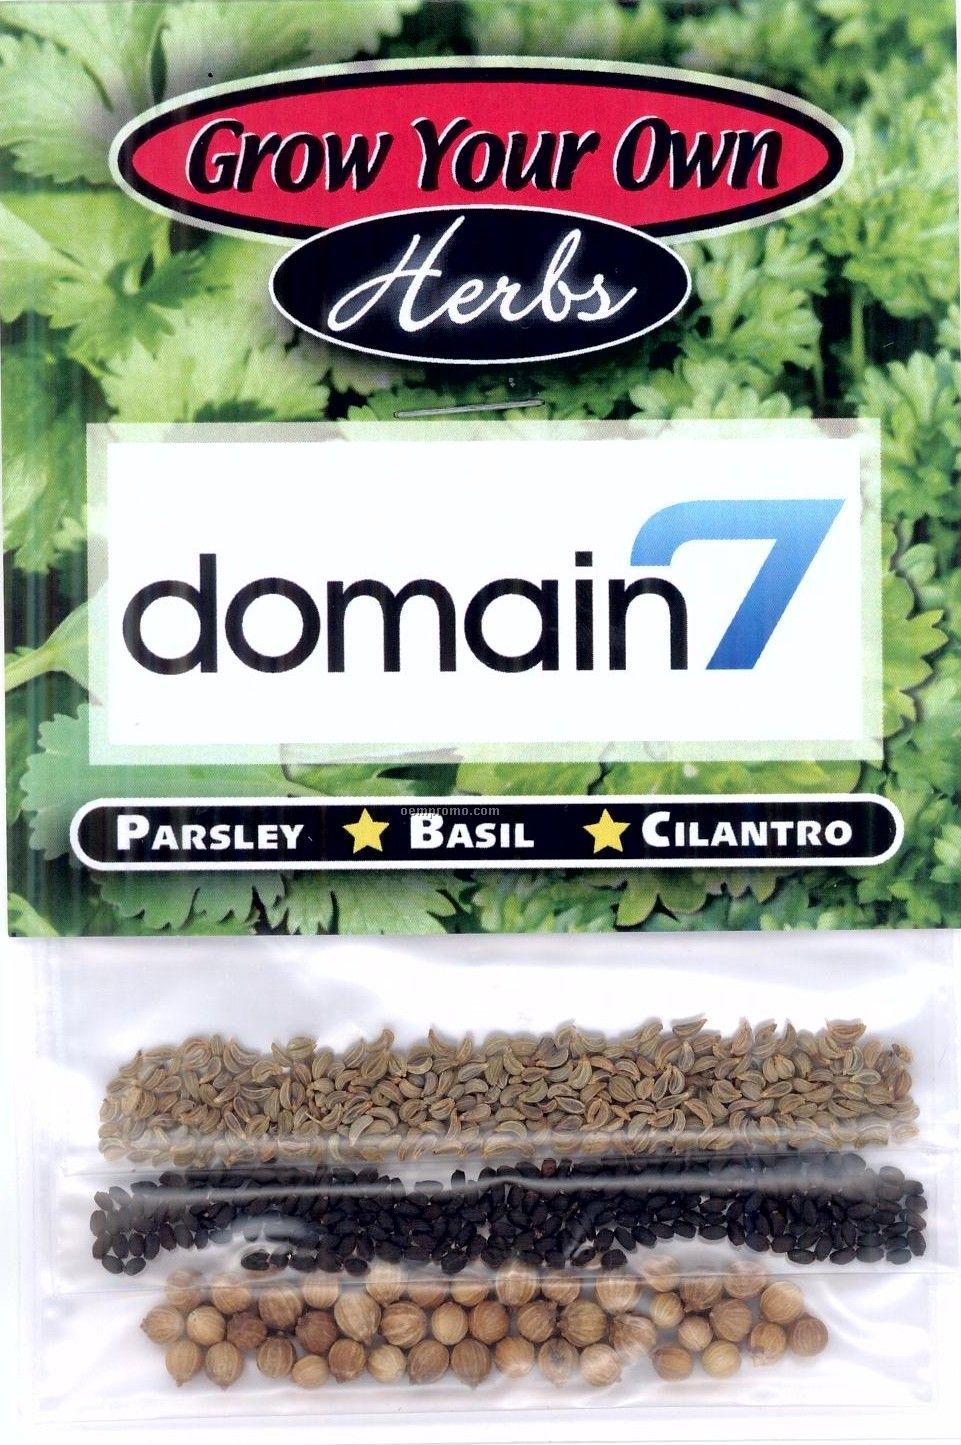 Grow Your Own Herbs Seed Packs